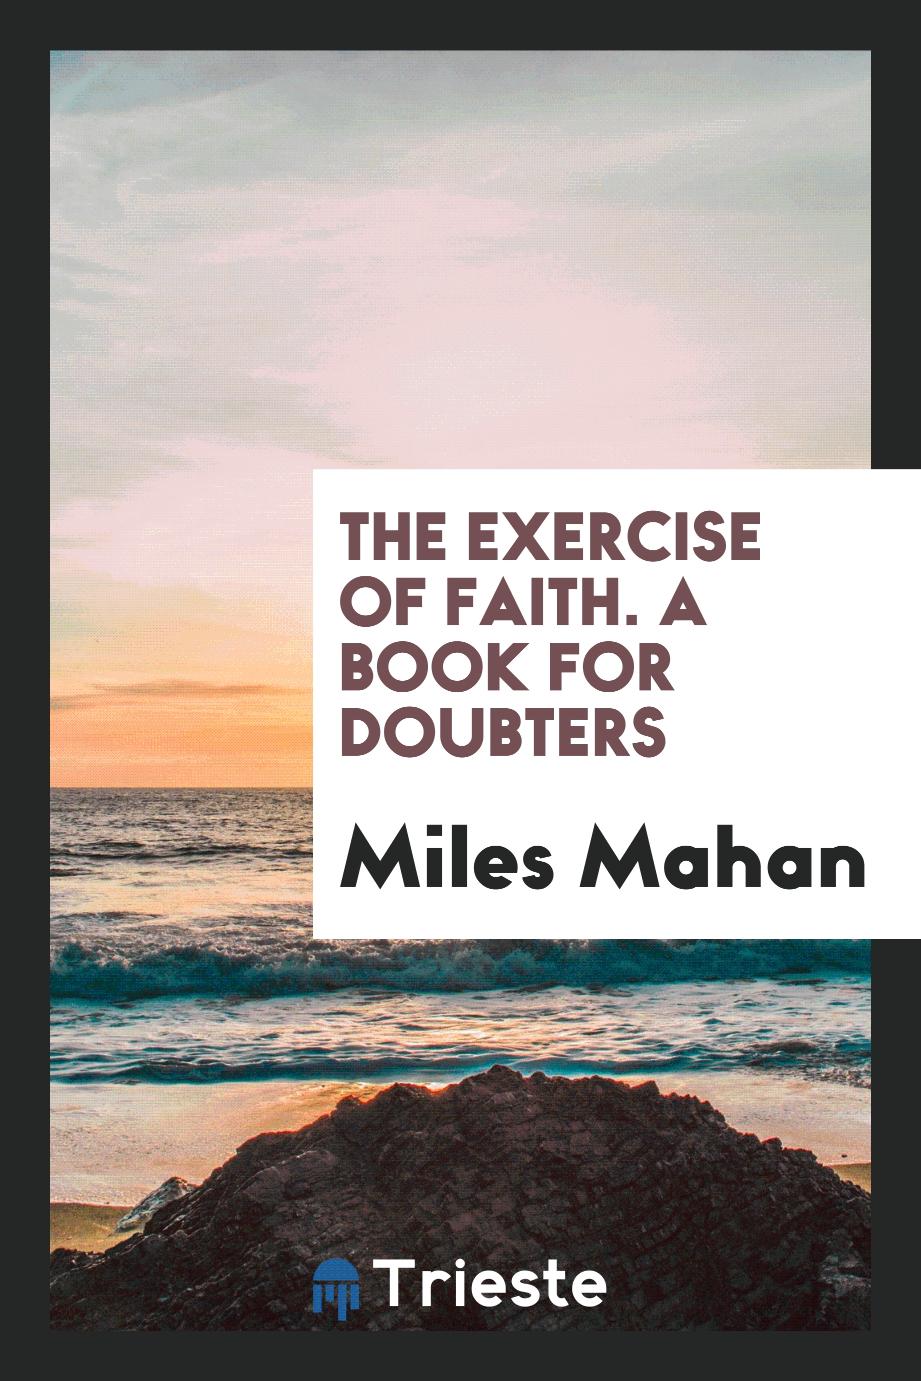 The Exercise of Faith. A Book for Doubters